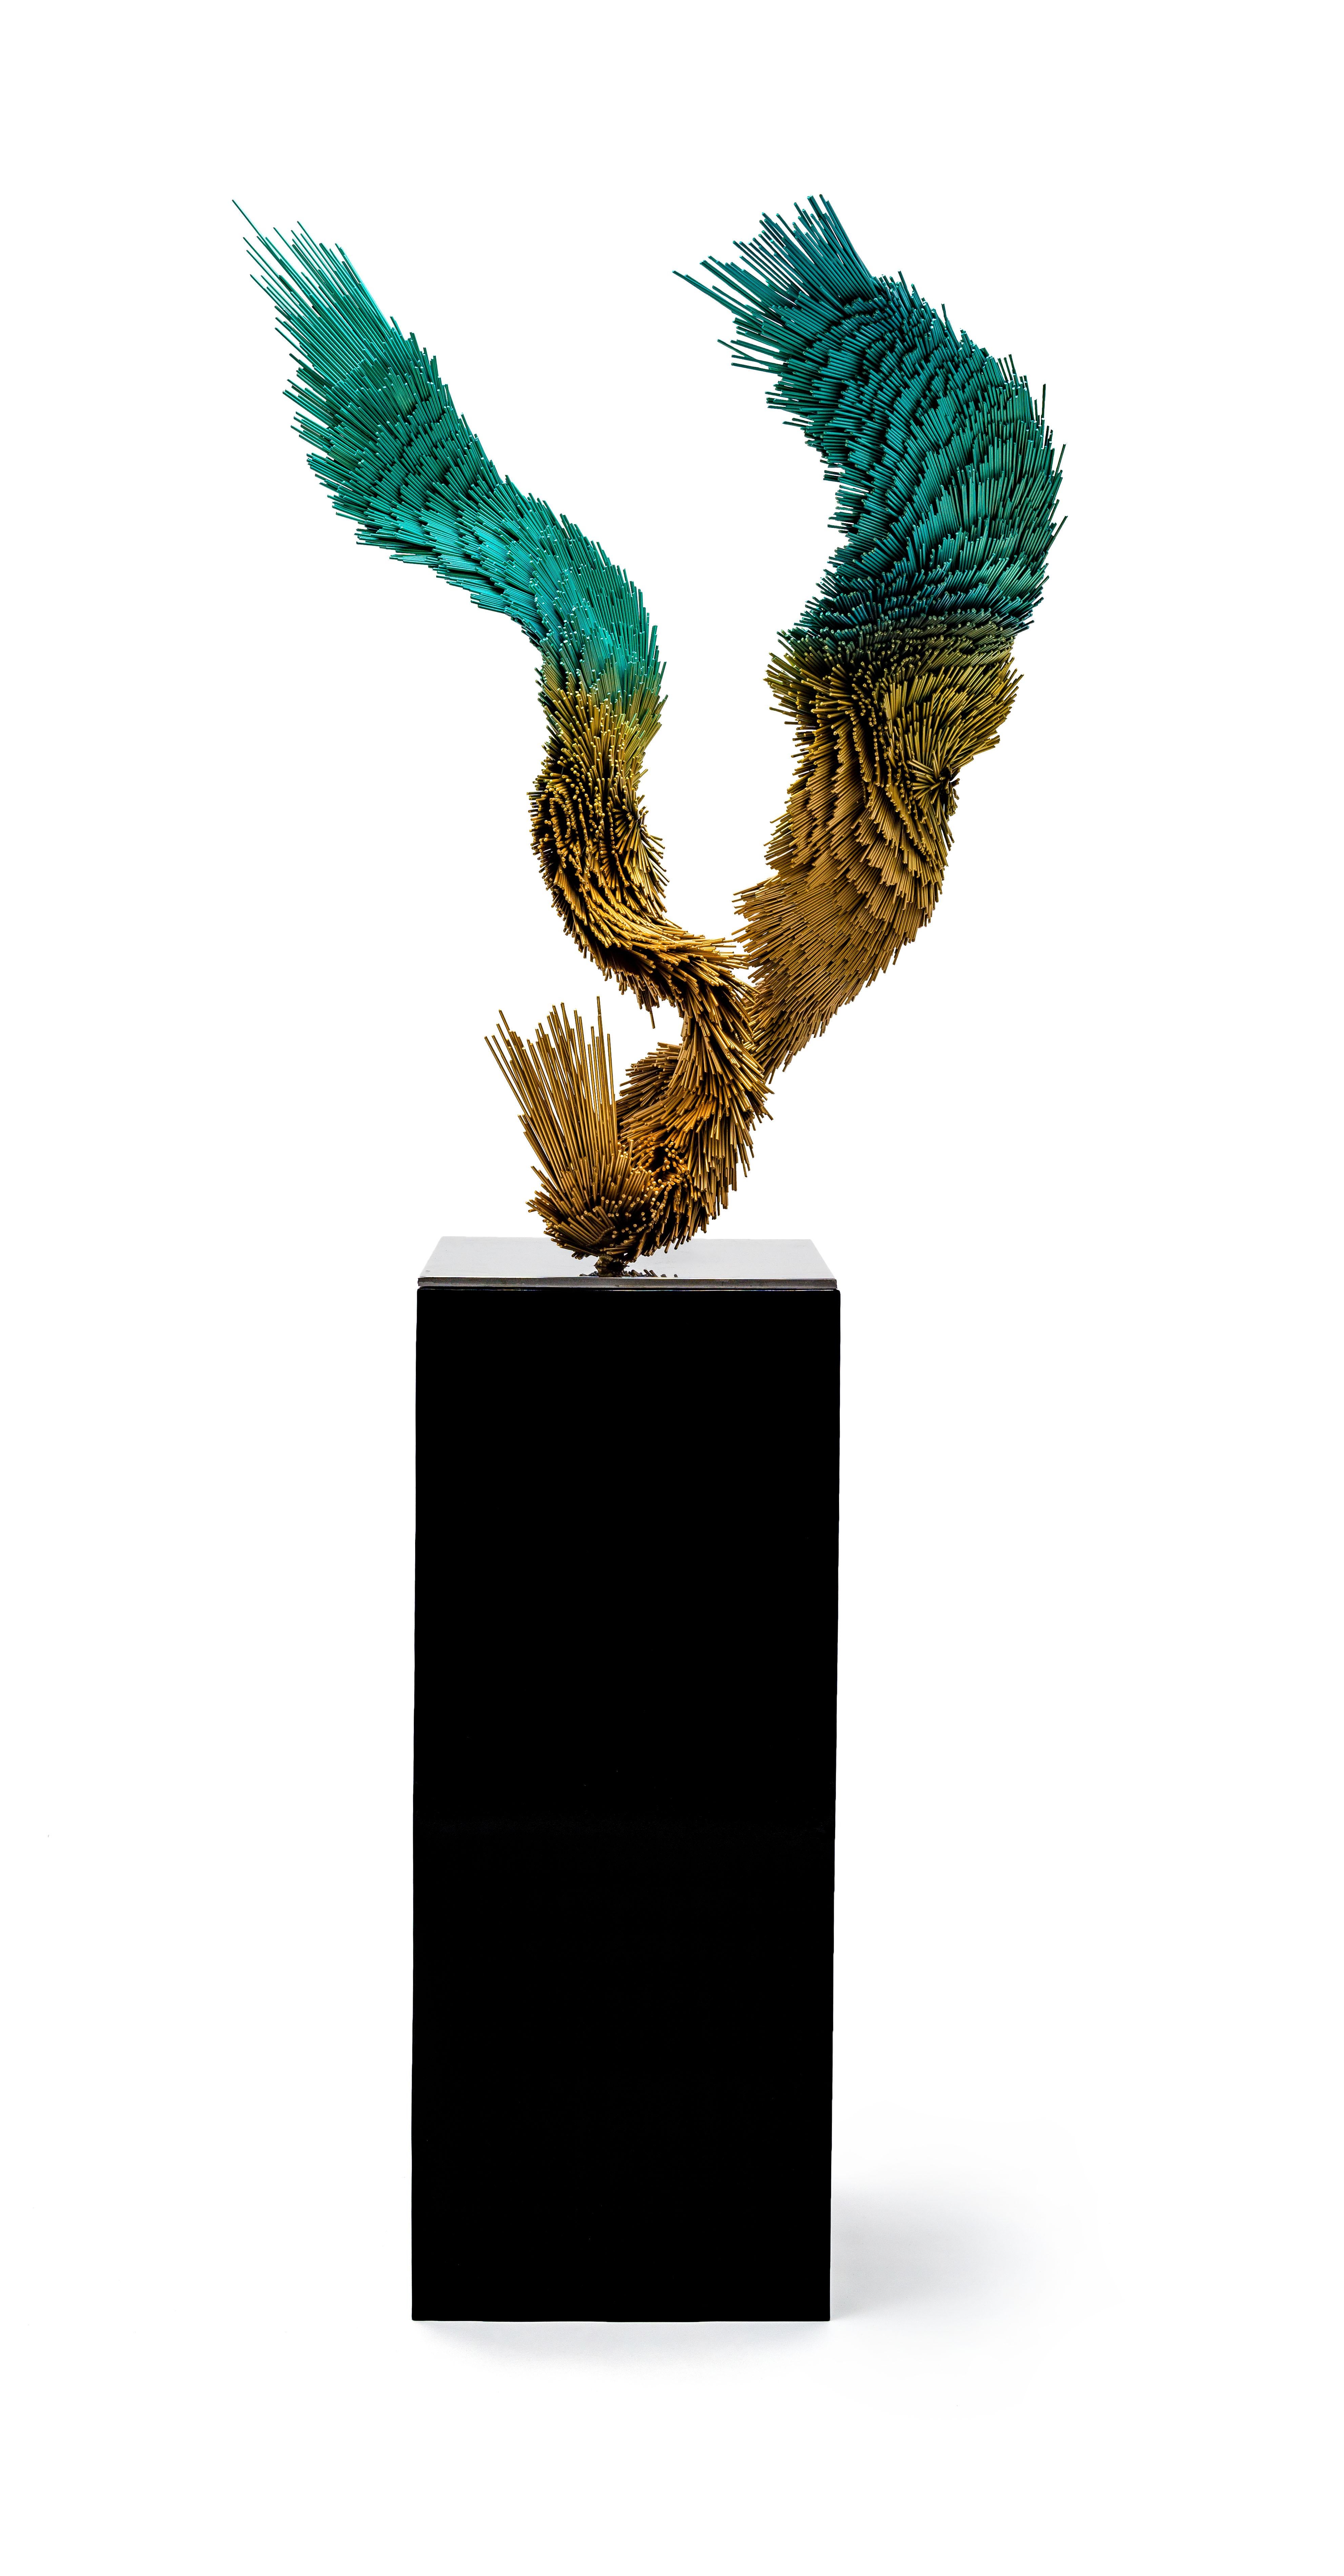 Gleaming Murmur, Steel contemporary bird sculpture in yellow and green - Sculpture by Jake Michael Singer